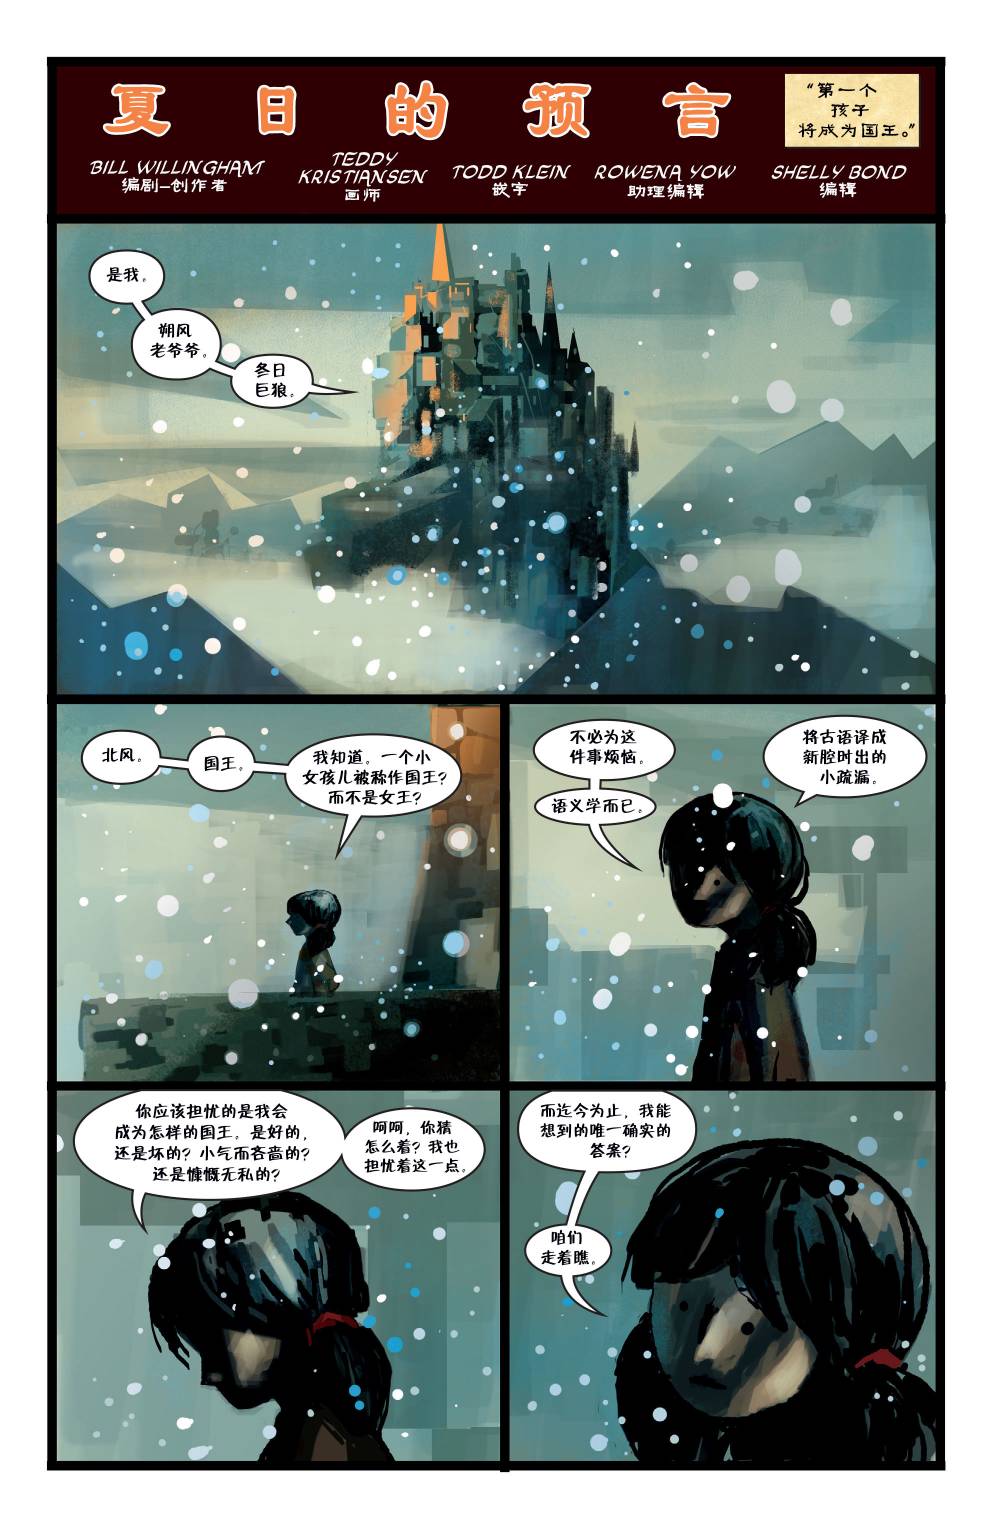 《Fables》漫画 150卷